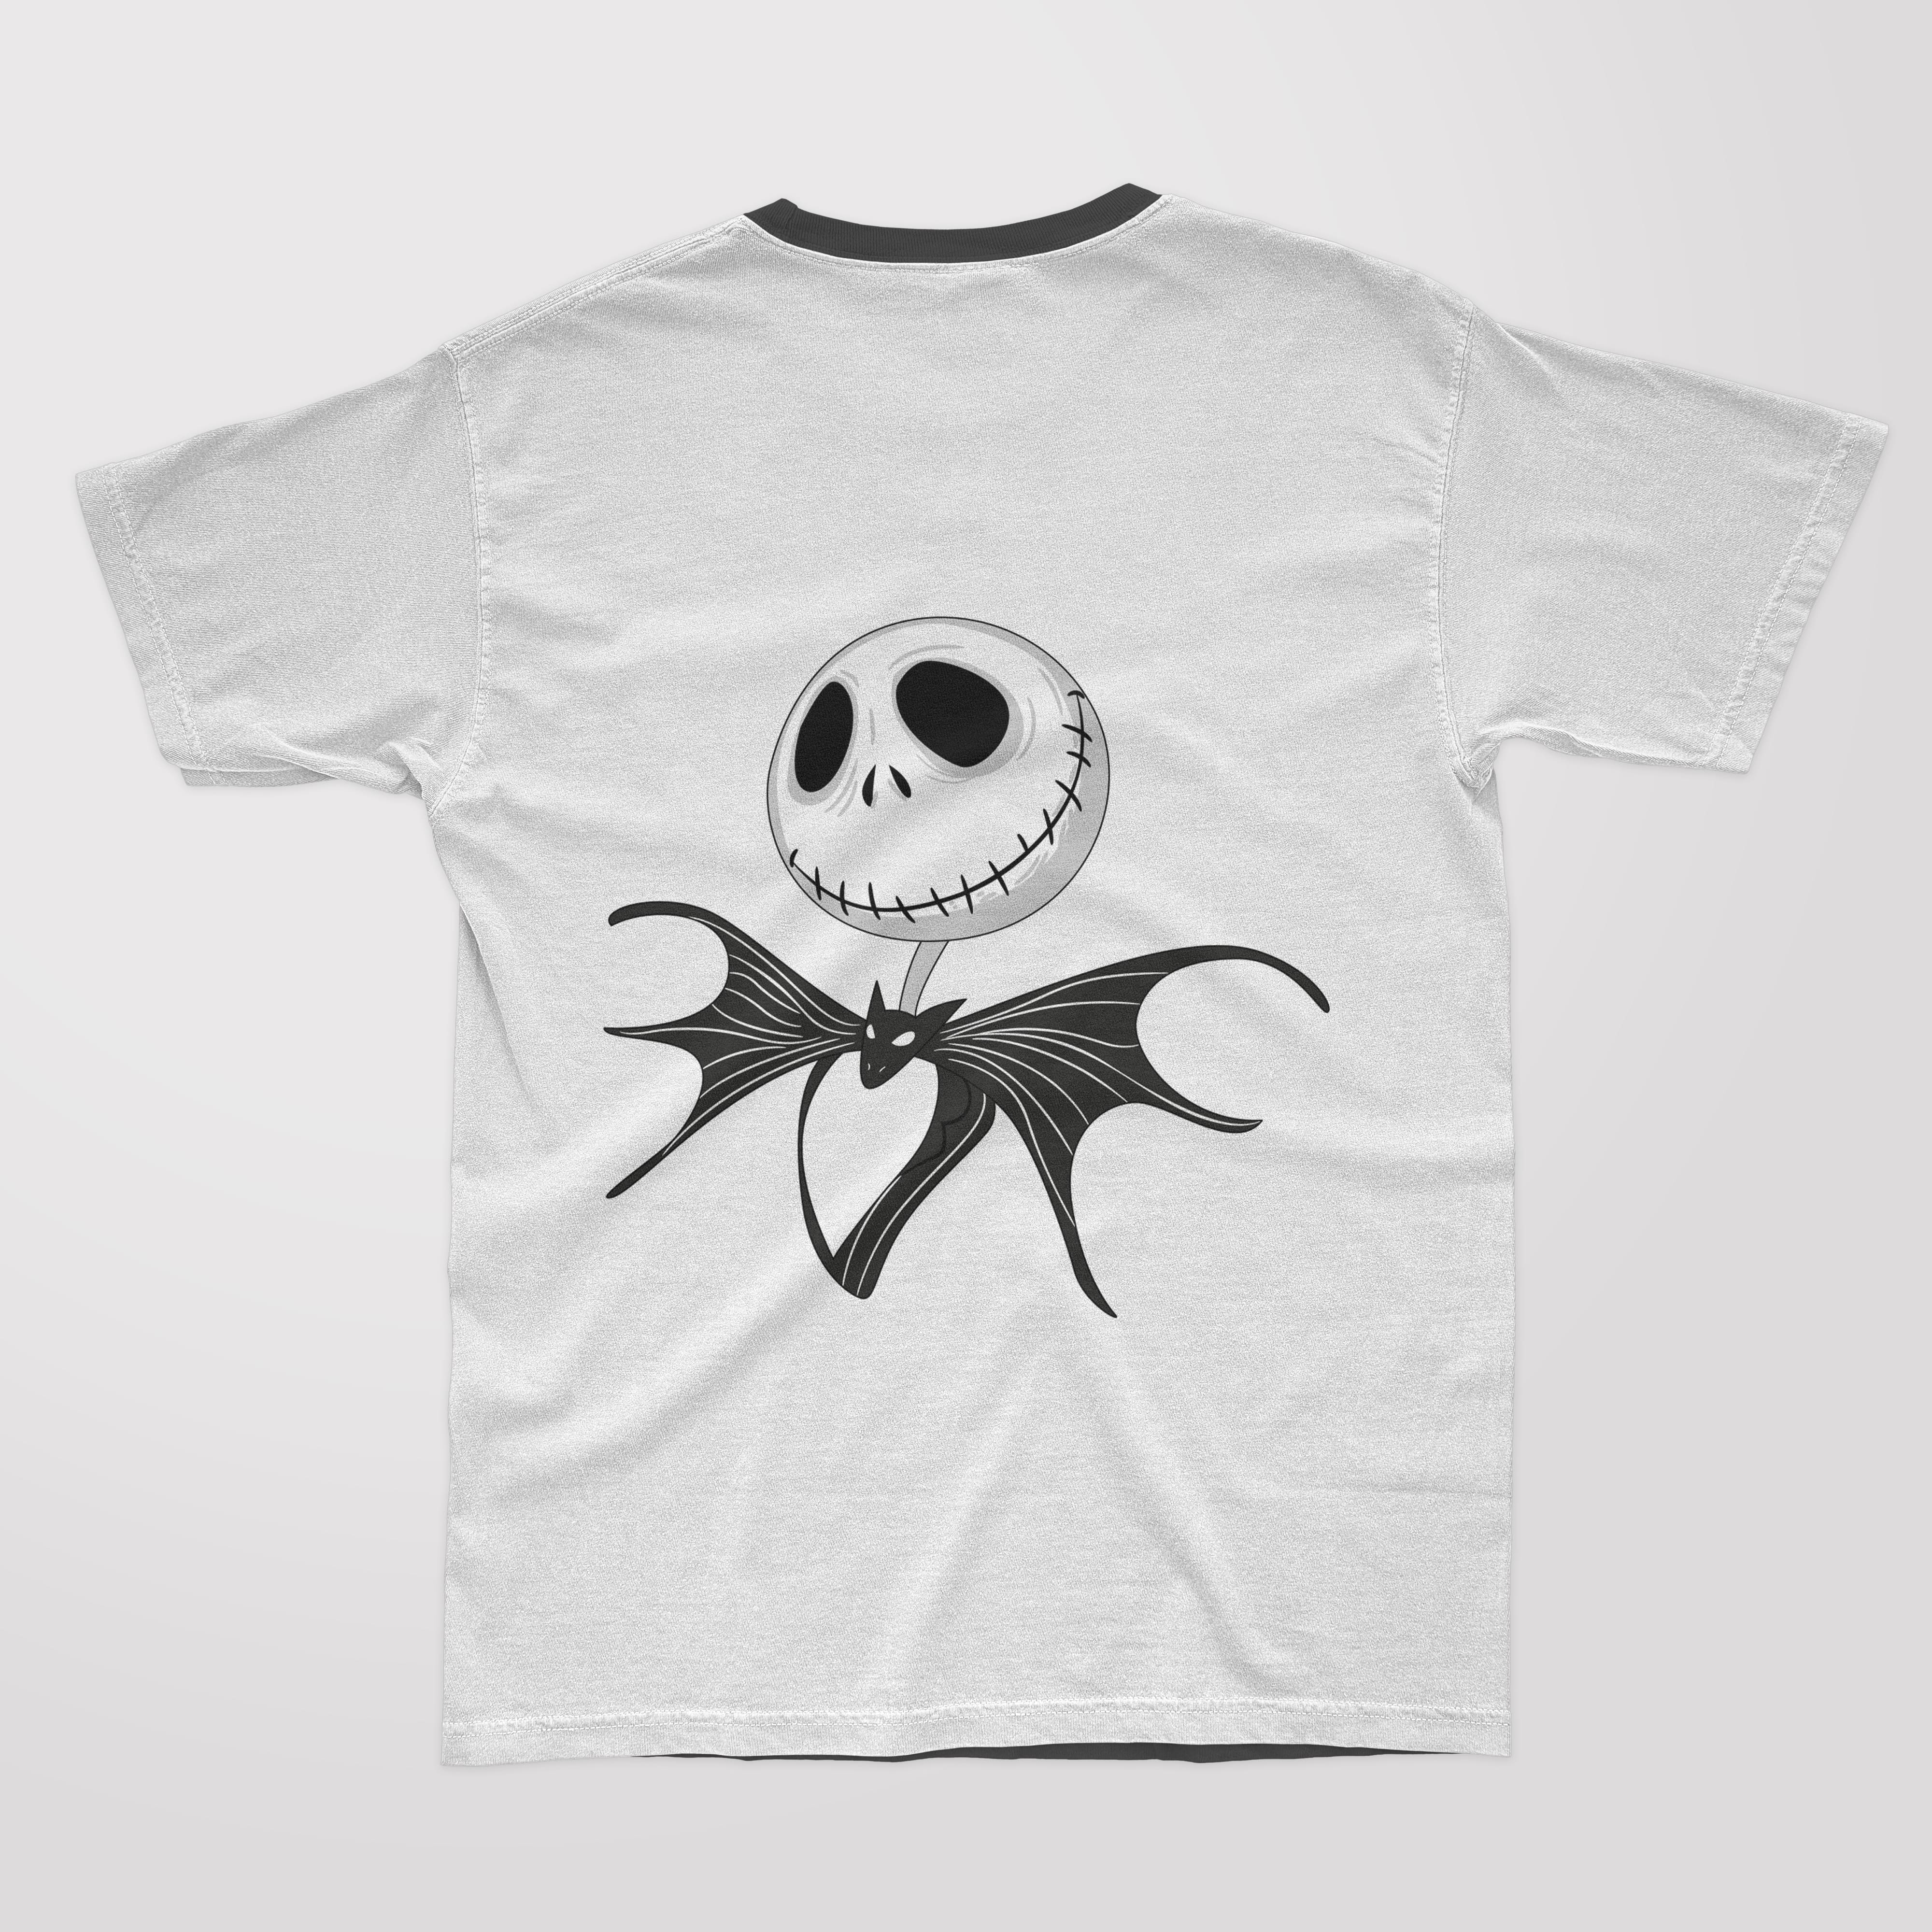 White t-shirt with jack skellington bow tie and black collar.